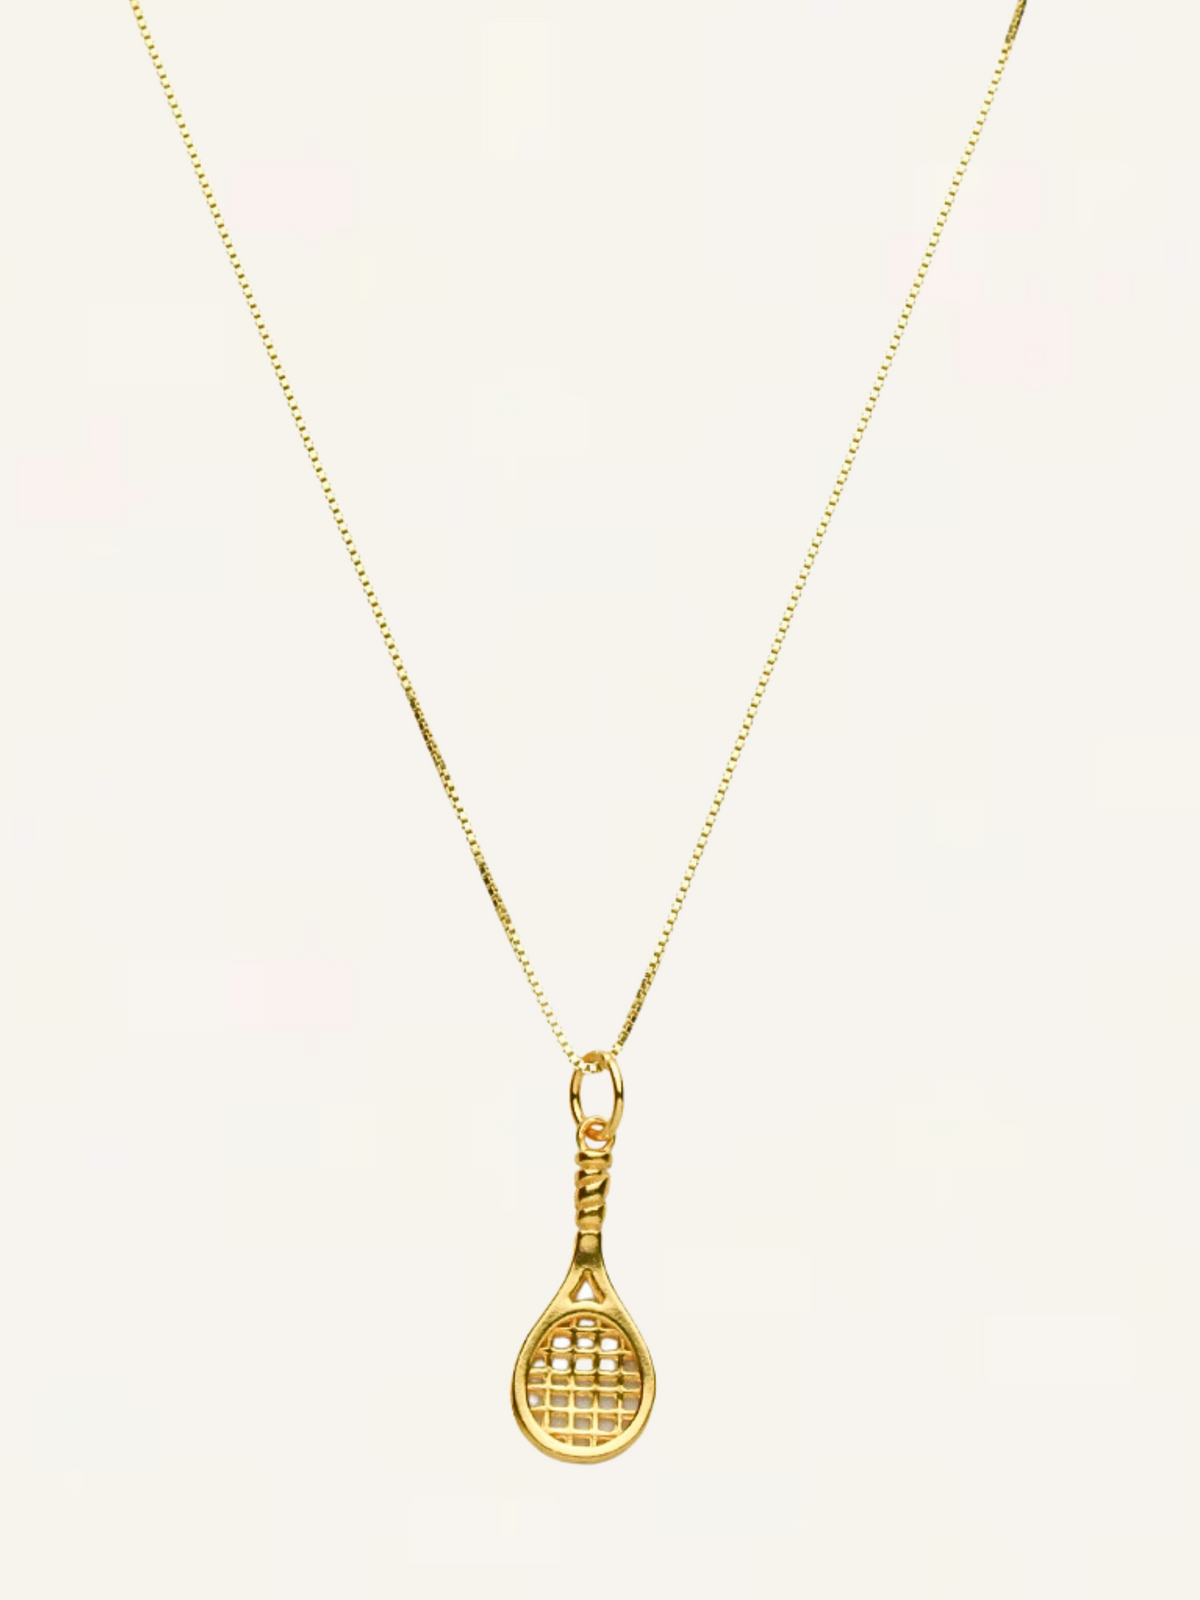 Tennis Charm Necklace - PRE ORDER